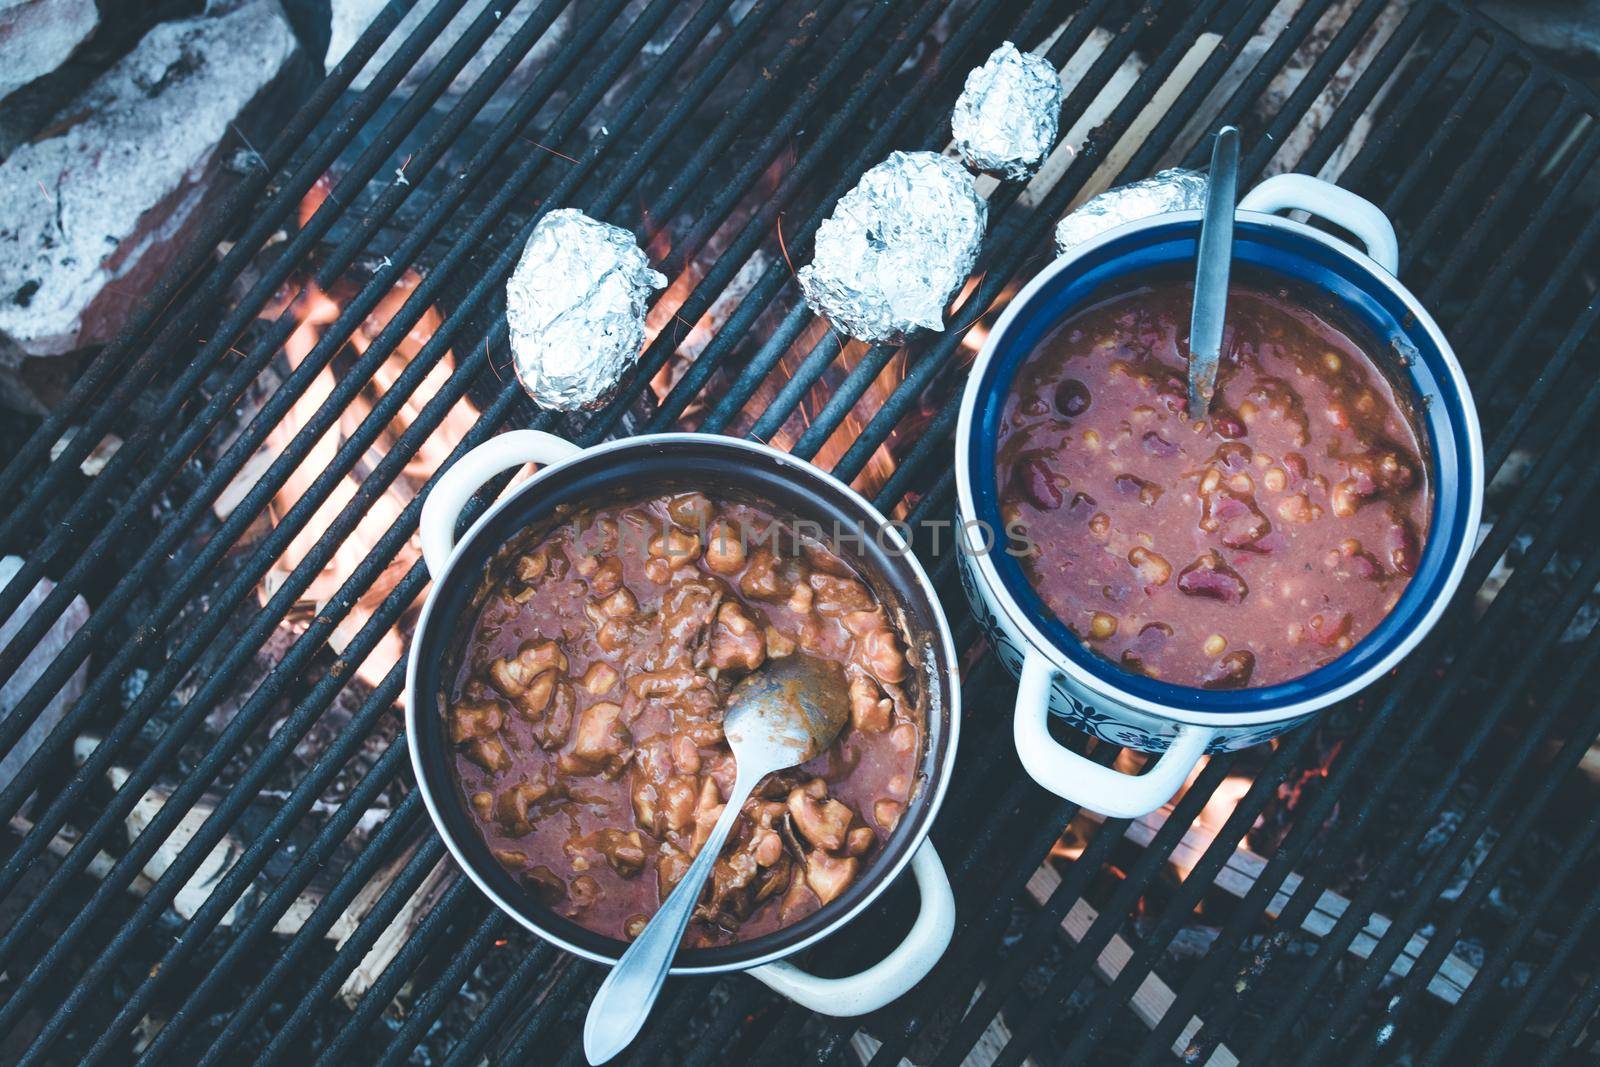 Tasty and spicy stew on bonfire, outdoors on a camping trip